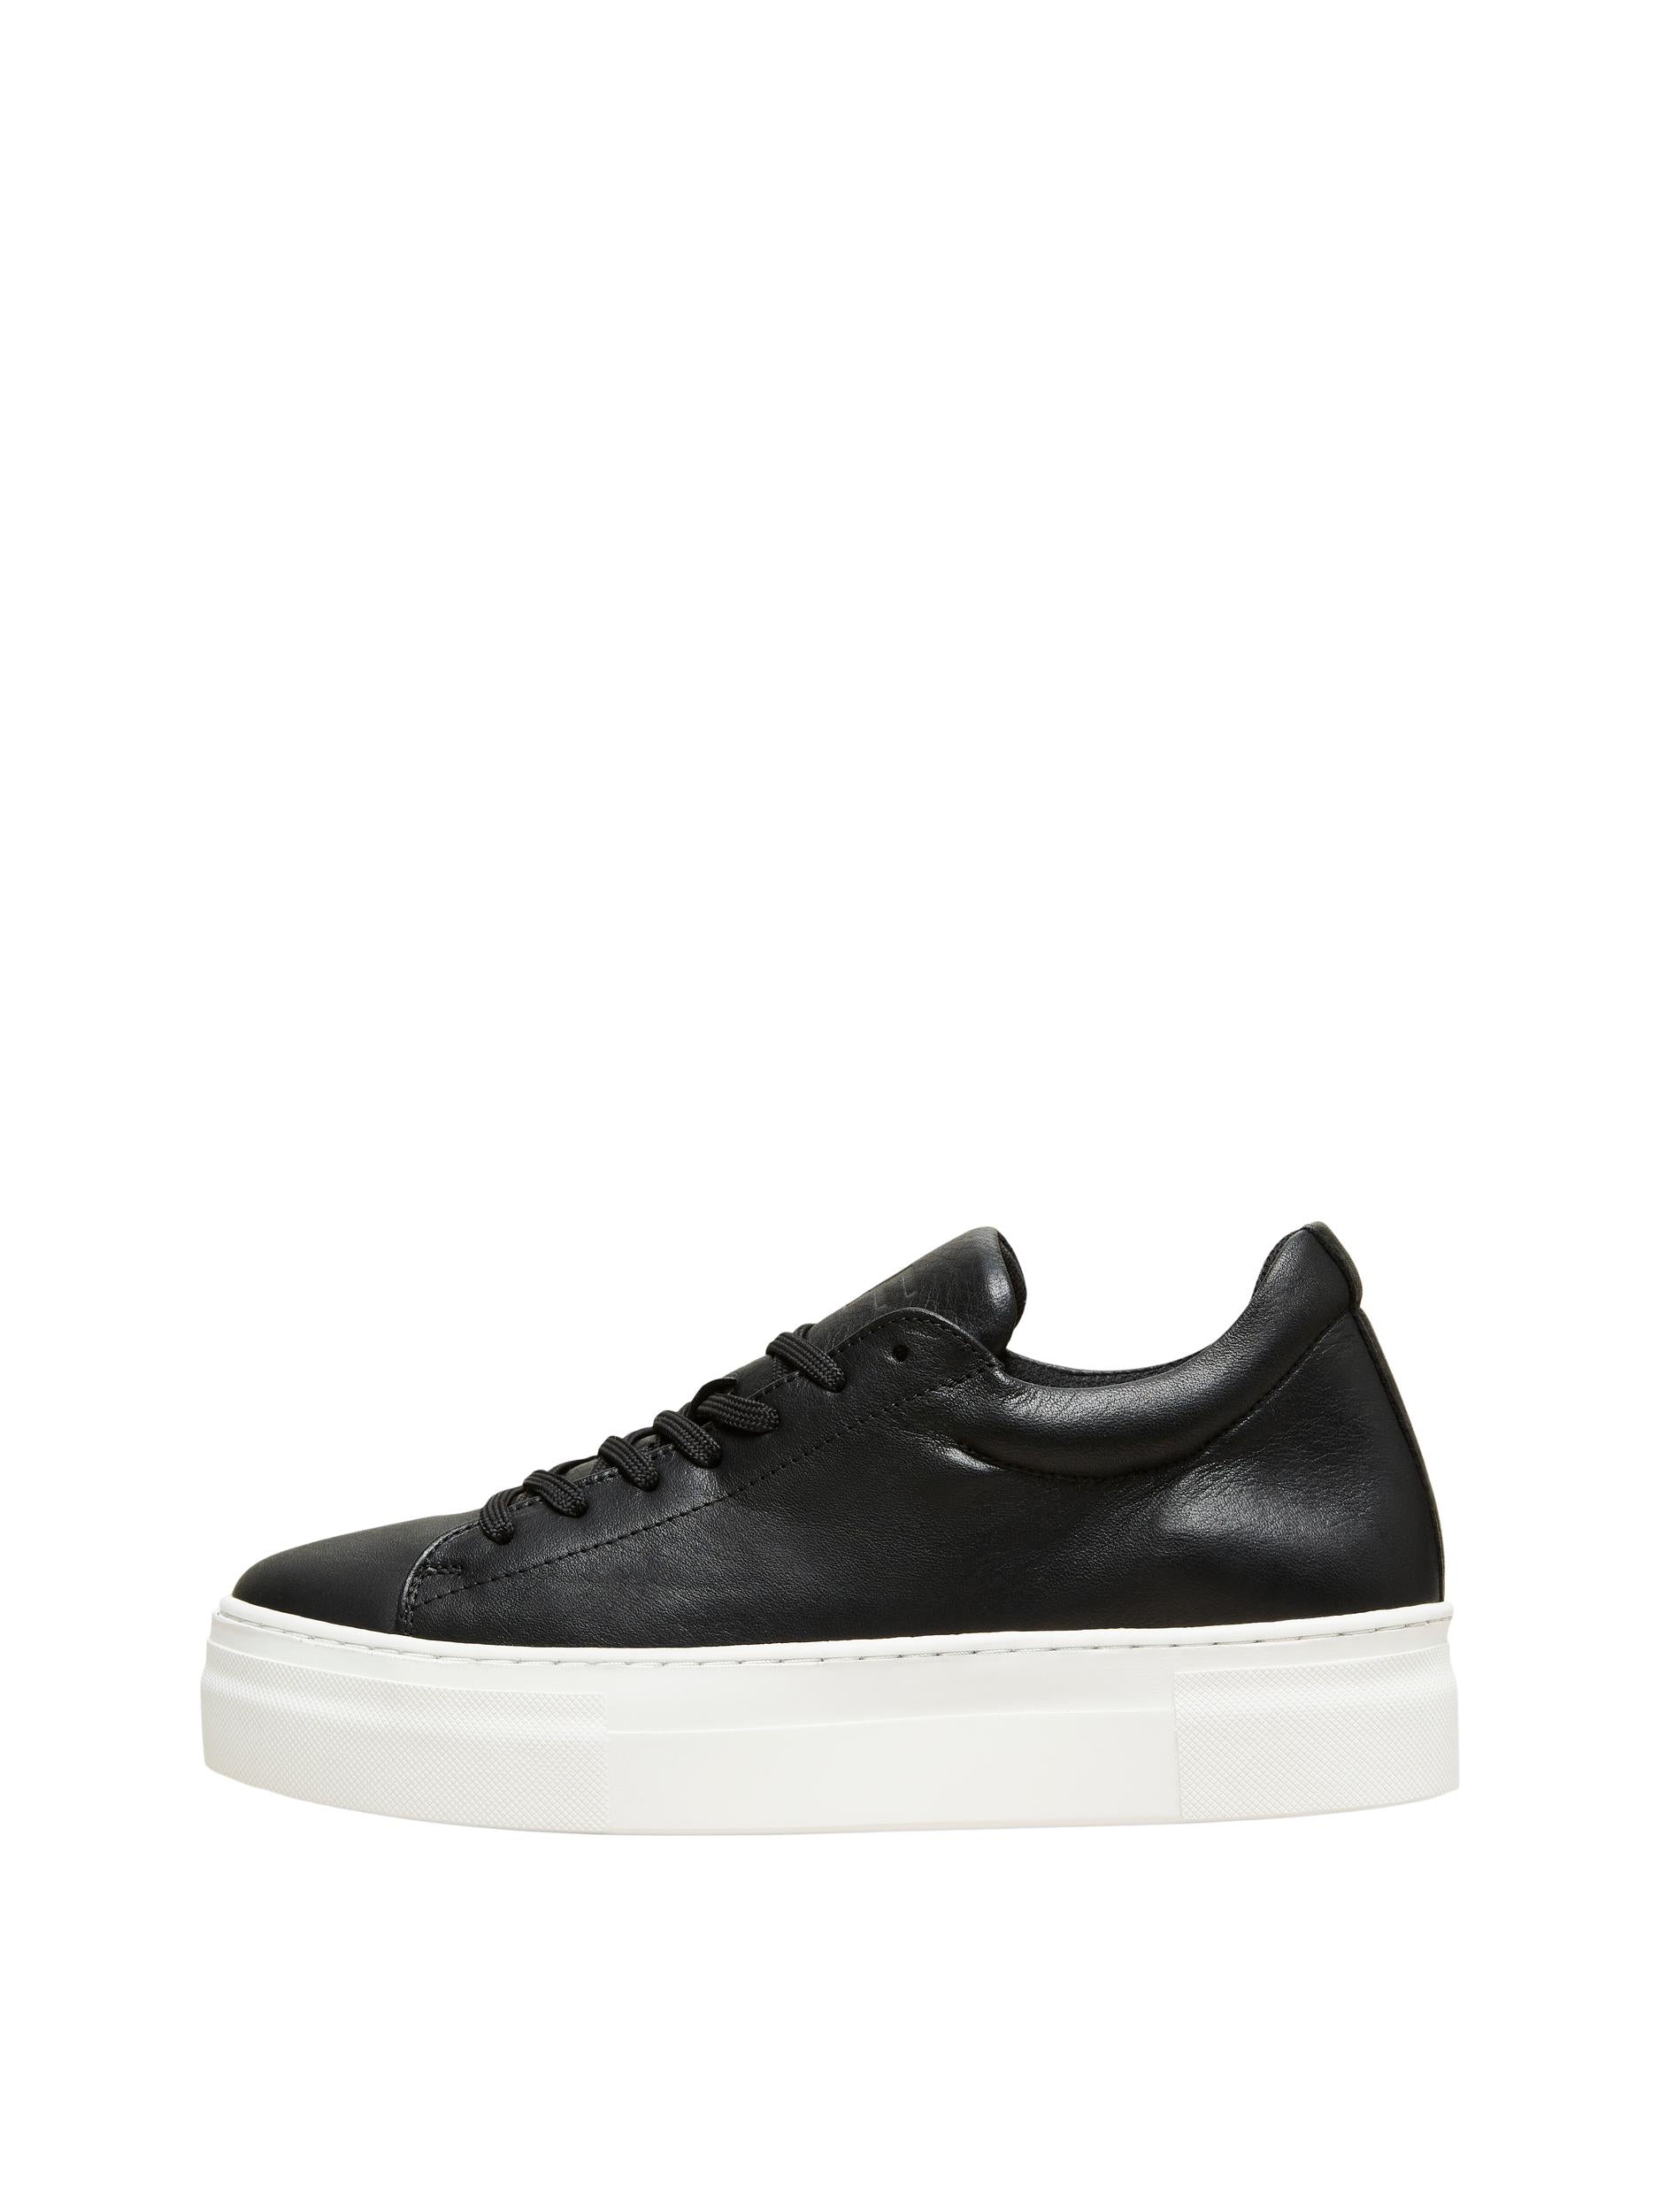 SLF Hailey Leather Trainer in Black